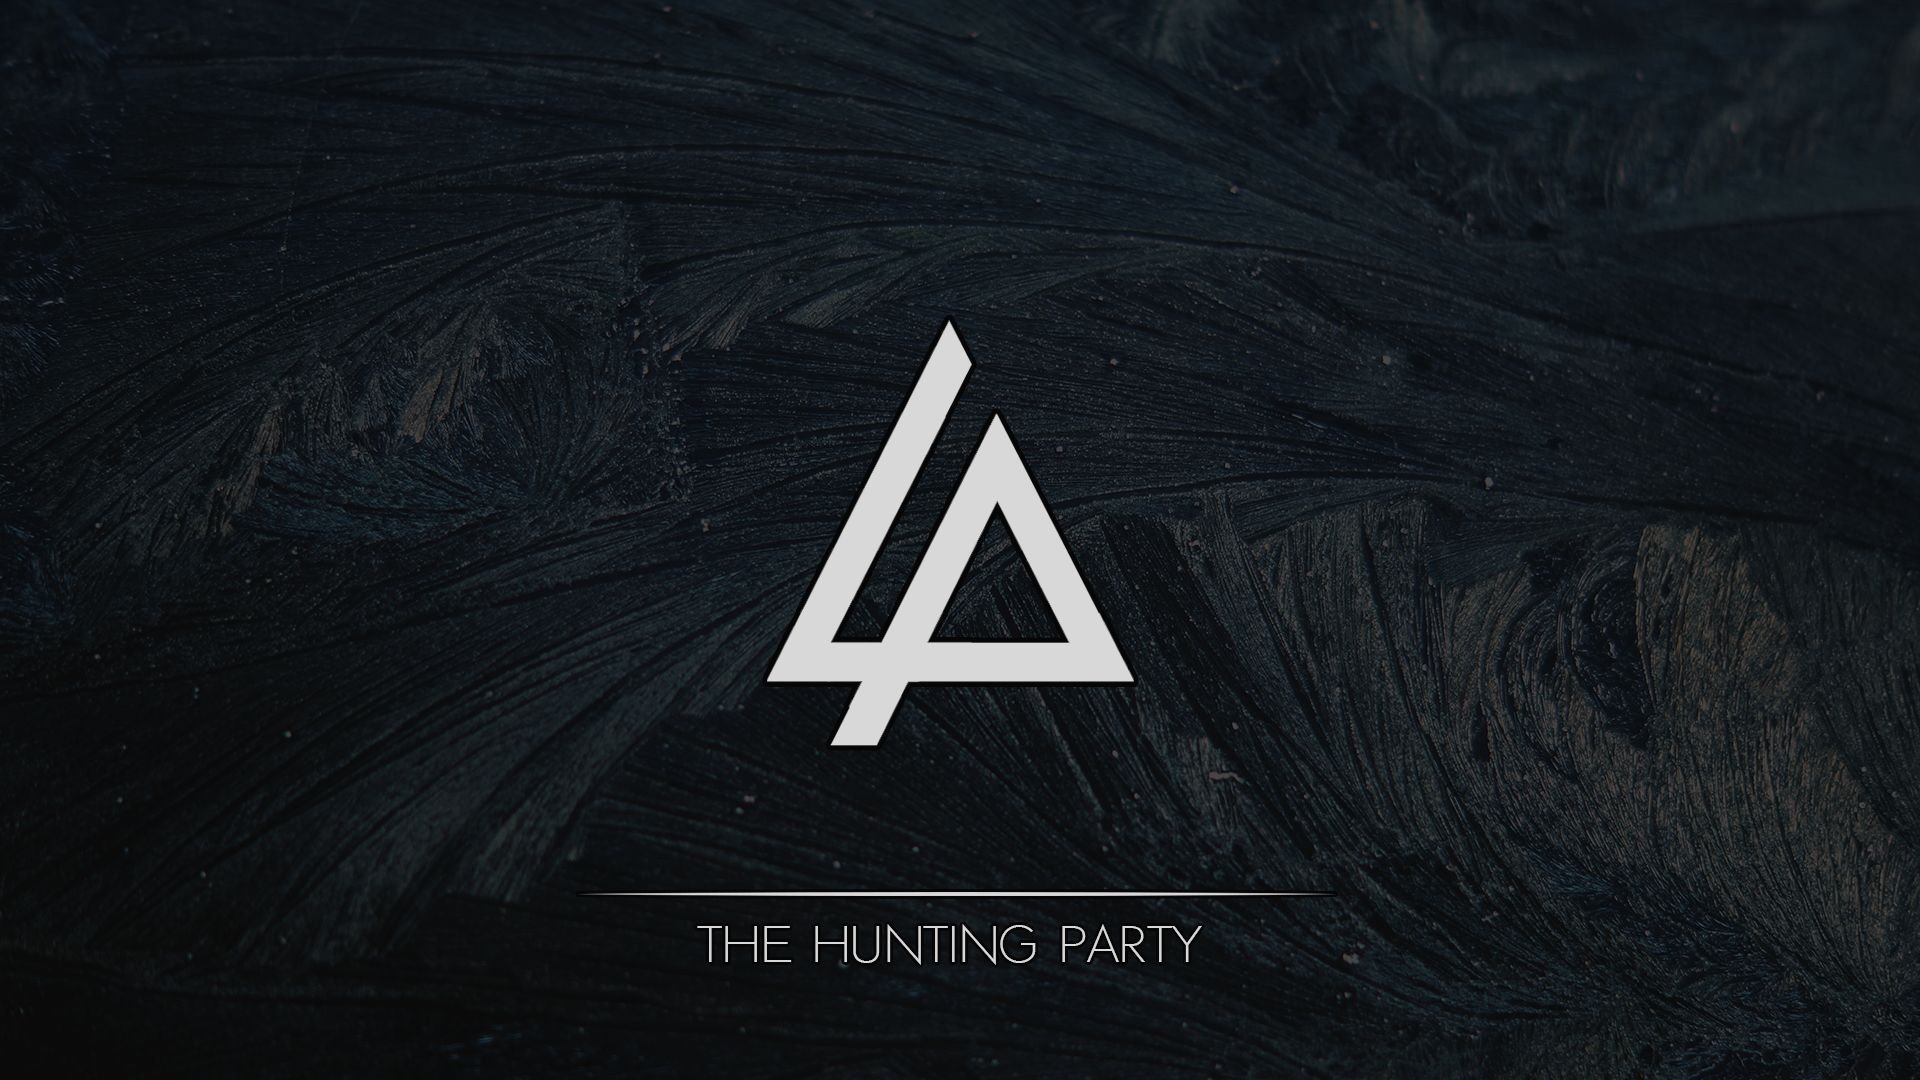 music, Linkin Park, the hunting party | wallpapers is